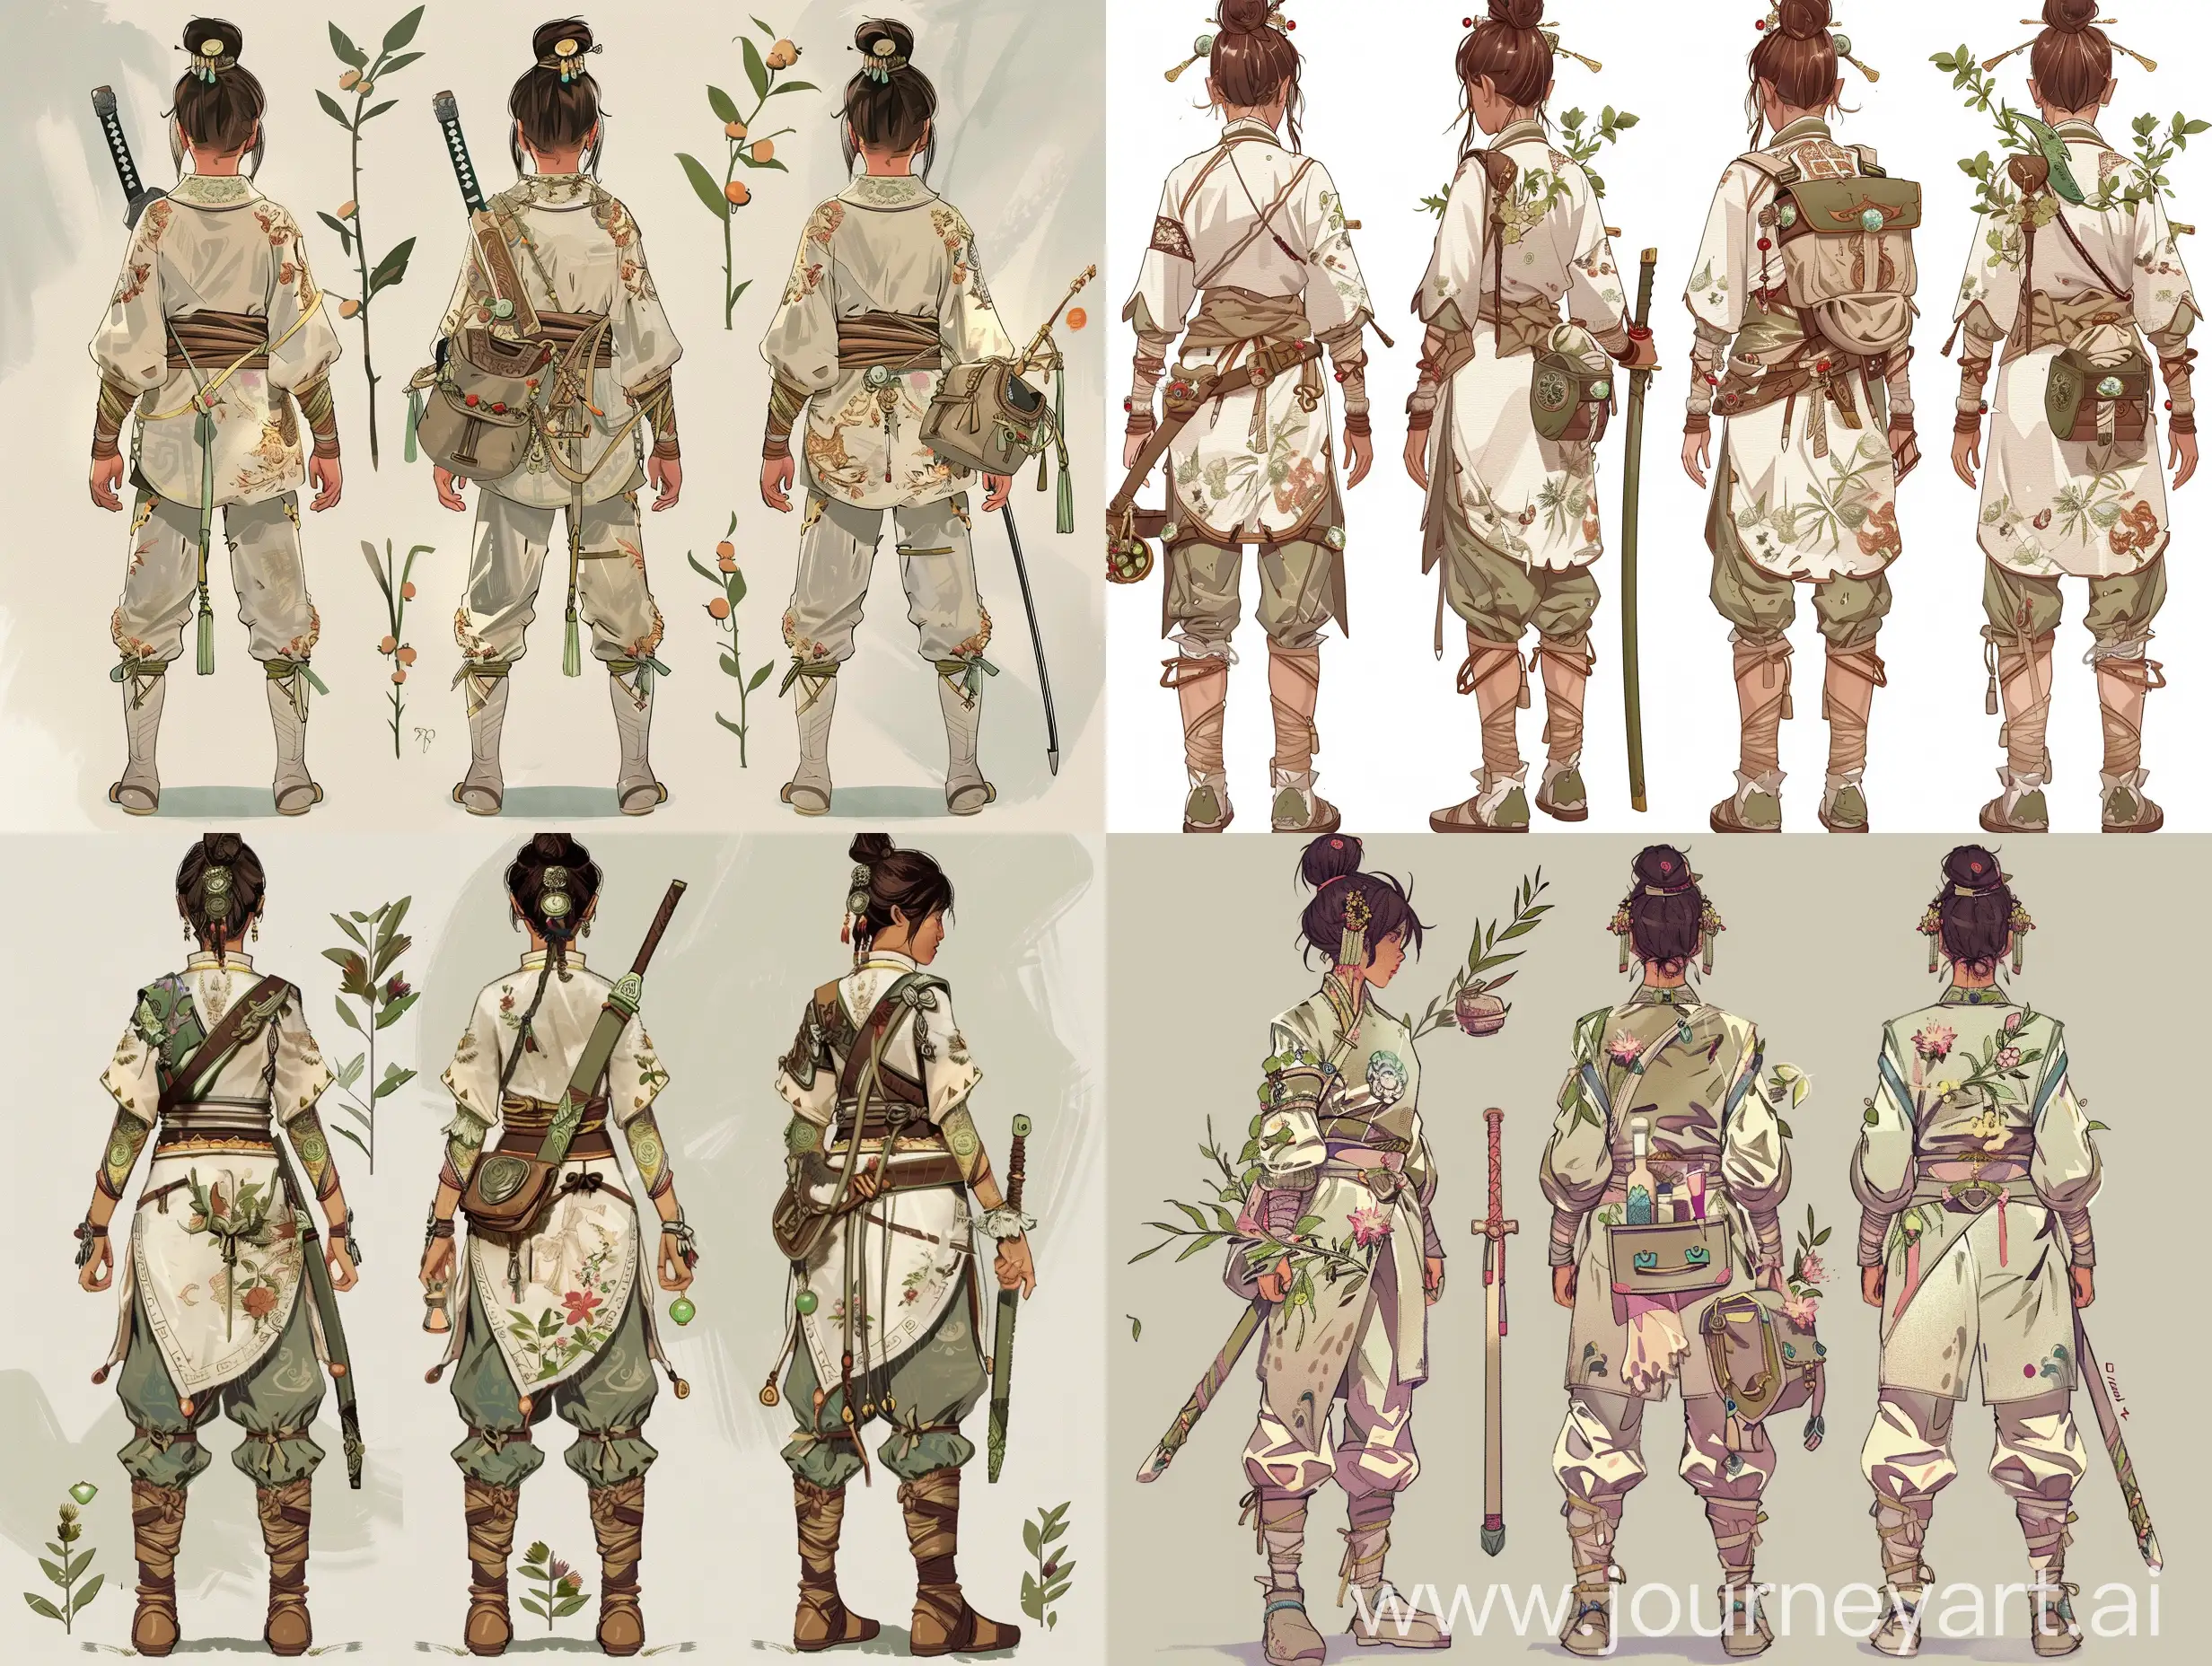 East-Asian-Jungle-Academy-Teen-Girl-with-Jian-Sword-and-Potion-Satchel